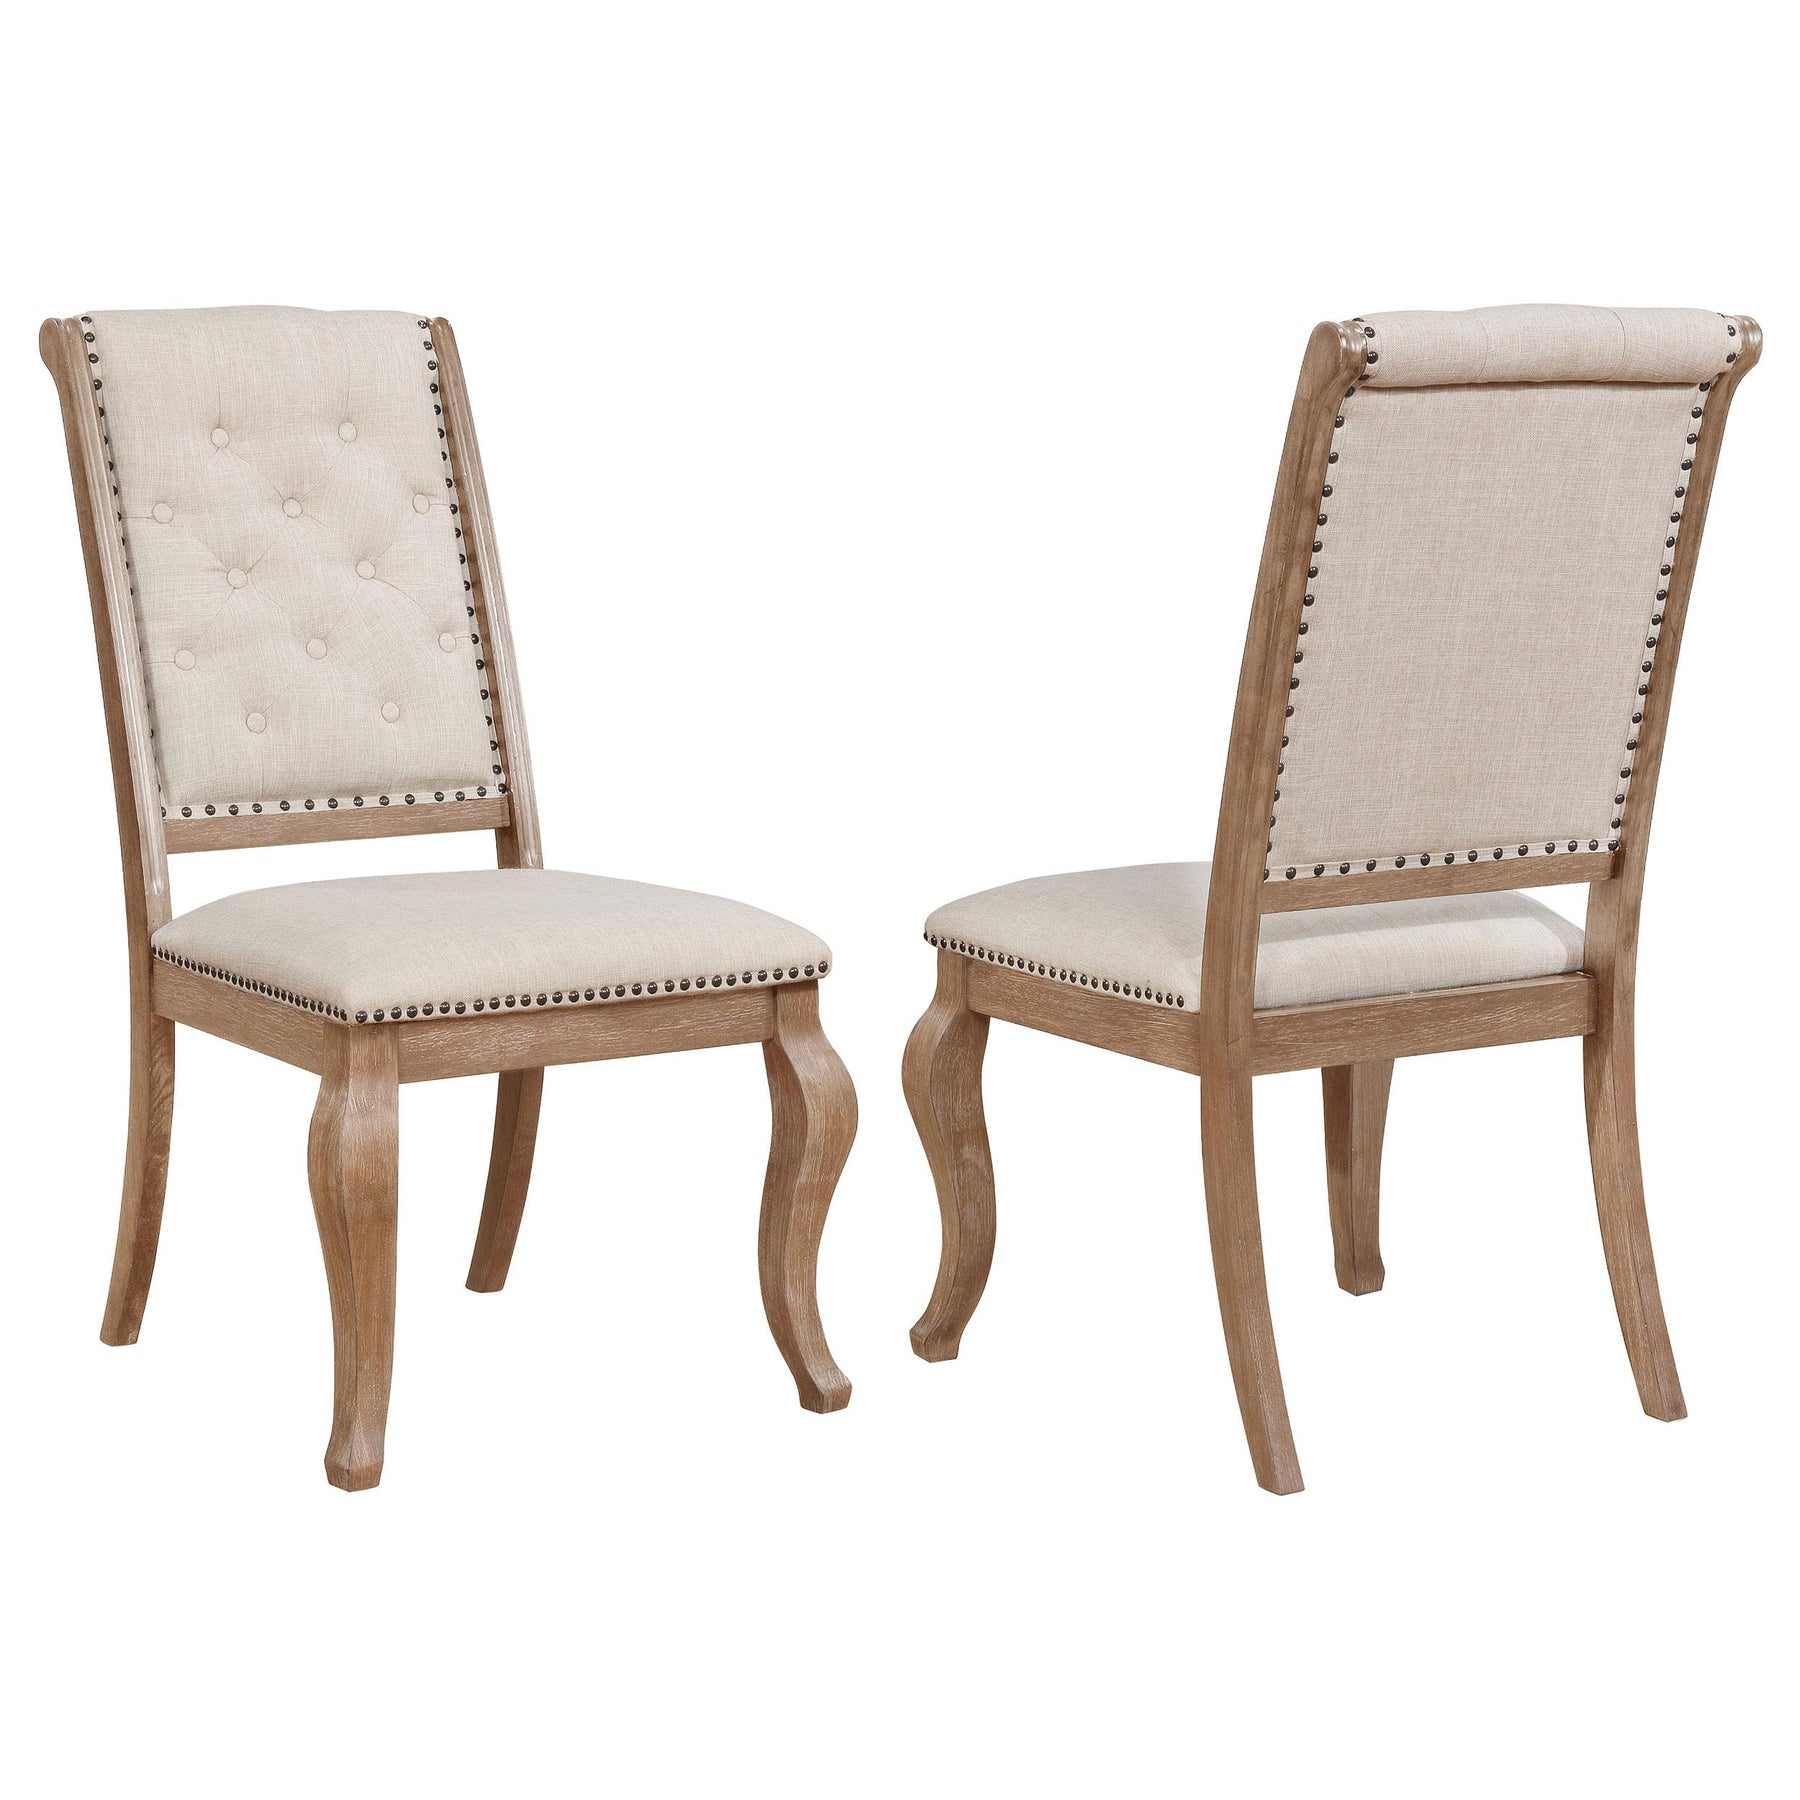 Brockway Tufted Side Chairs Cream and Barley Brown (Set of 2) Brockway Tufted Side Chairs Cream and Barley Brown (Set of 2) Half Price Furniture